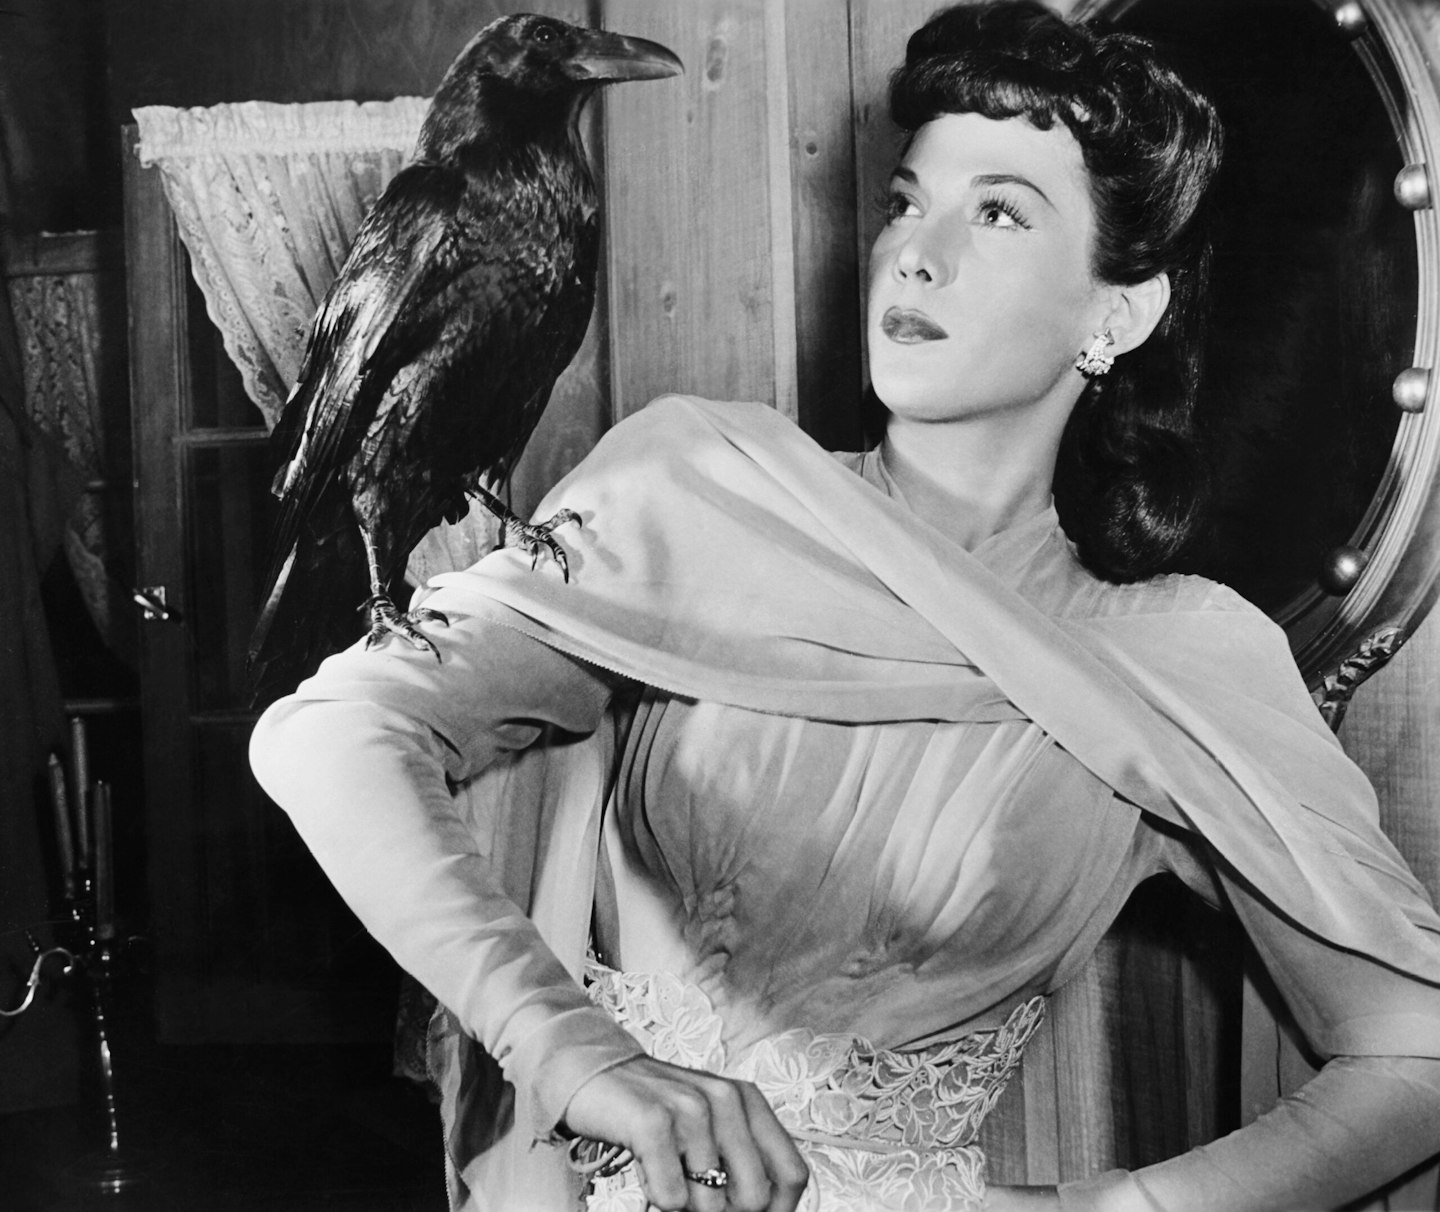 Louise Allbritton and Jimmy the Raven in Son of Dracula (1943)